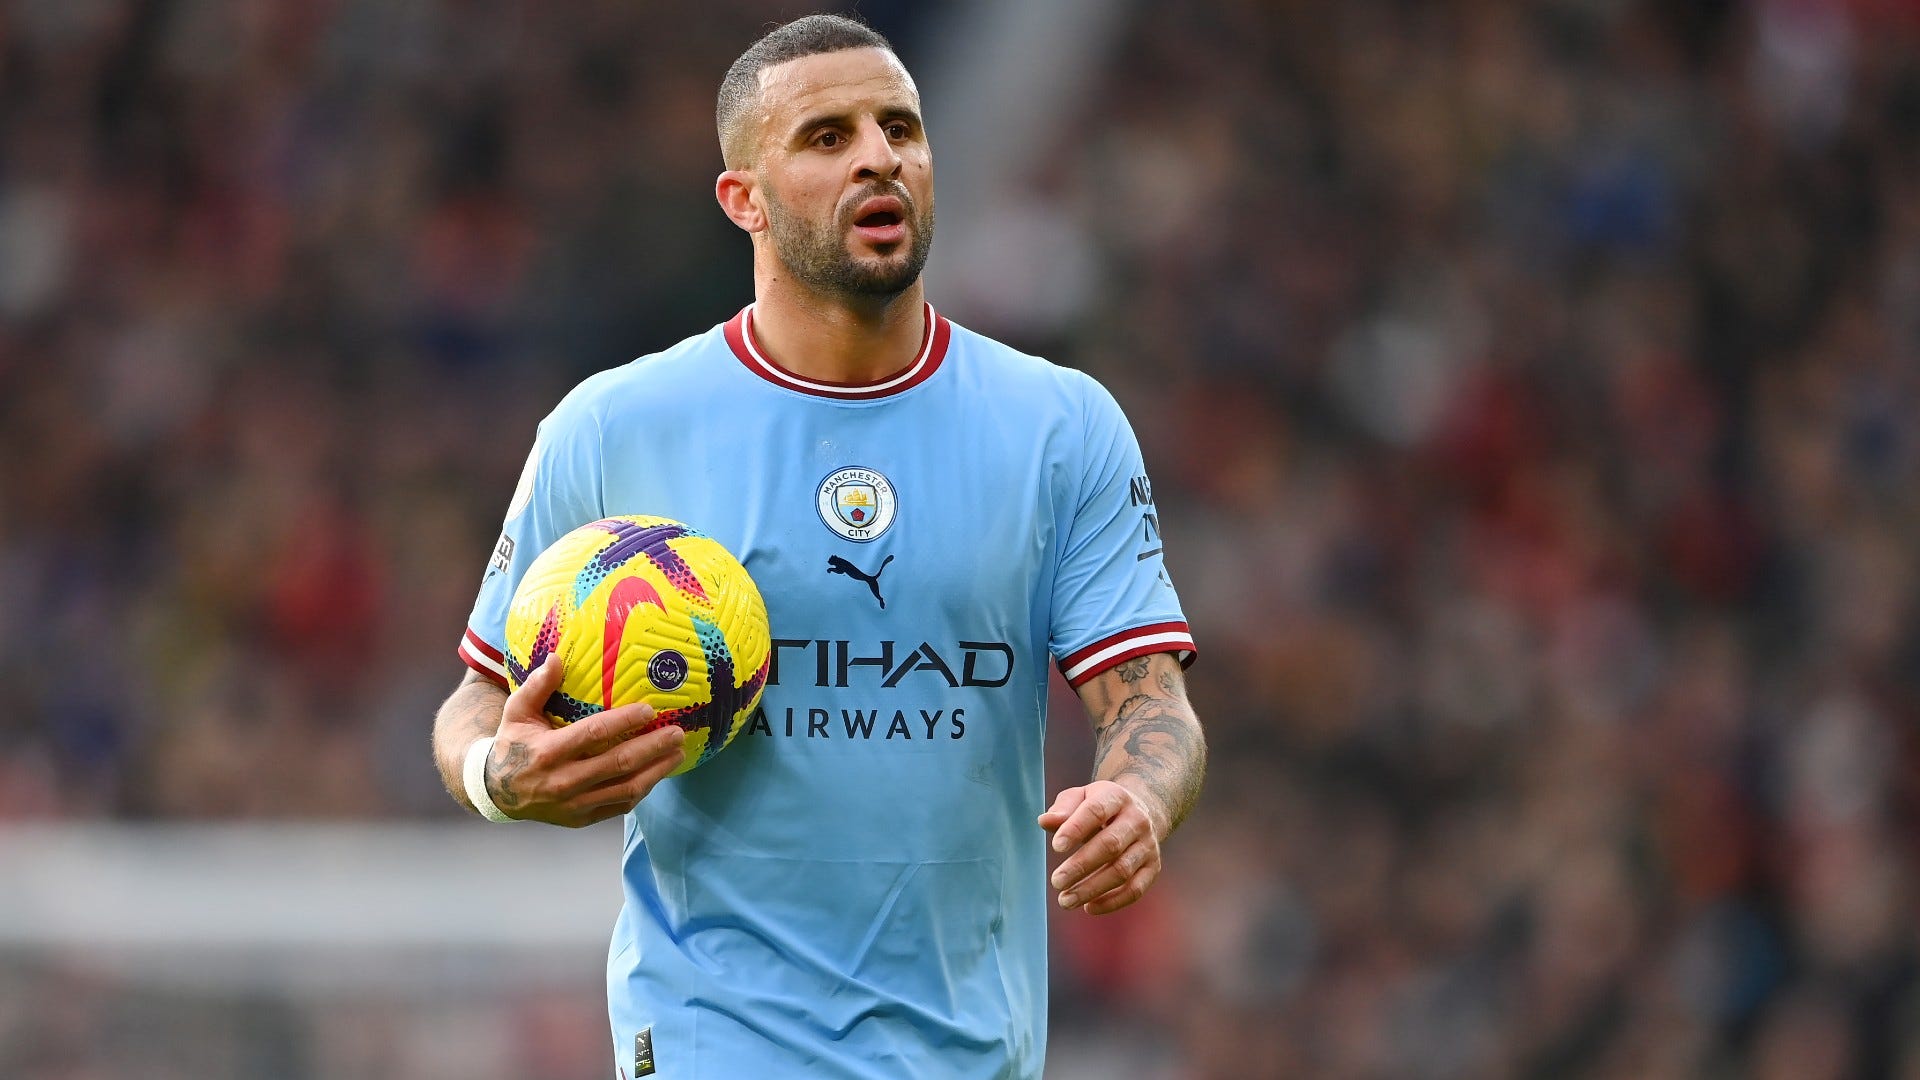 Kyle Walker claims Man City could surpass Man Utd's treble winners and